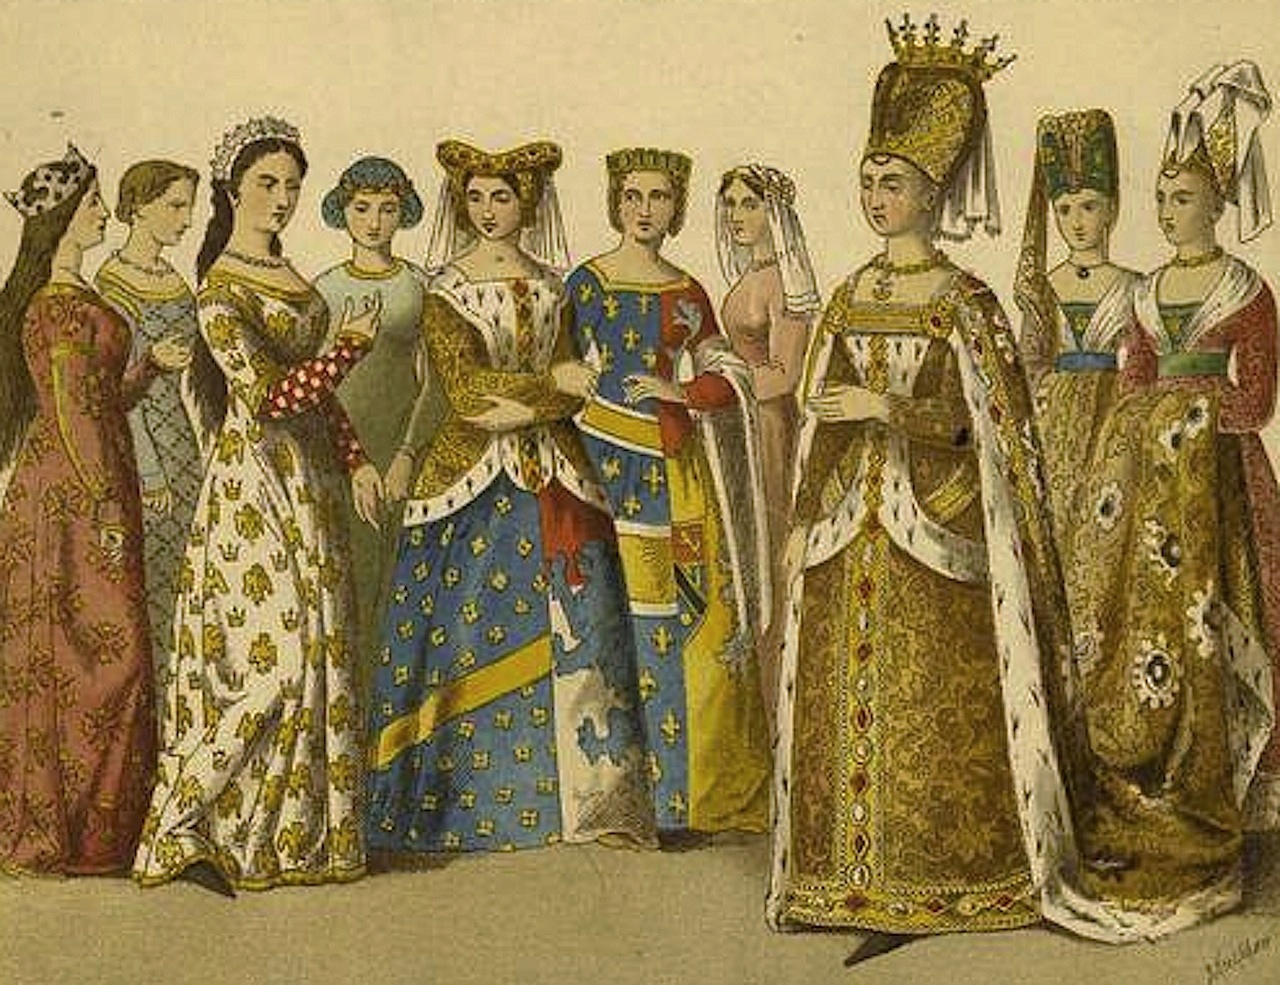 The Medieval Clotheshorse: Roger Wieck on the Fashion Revolution